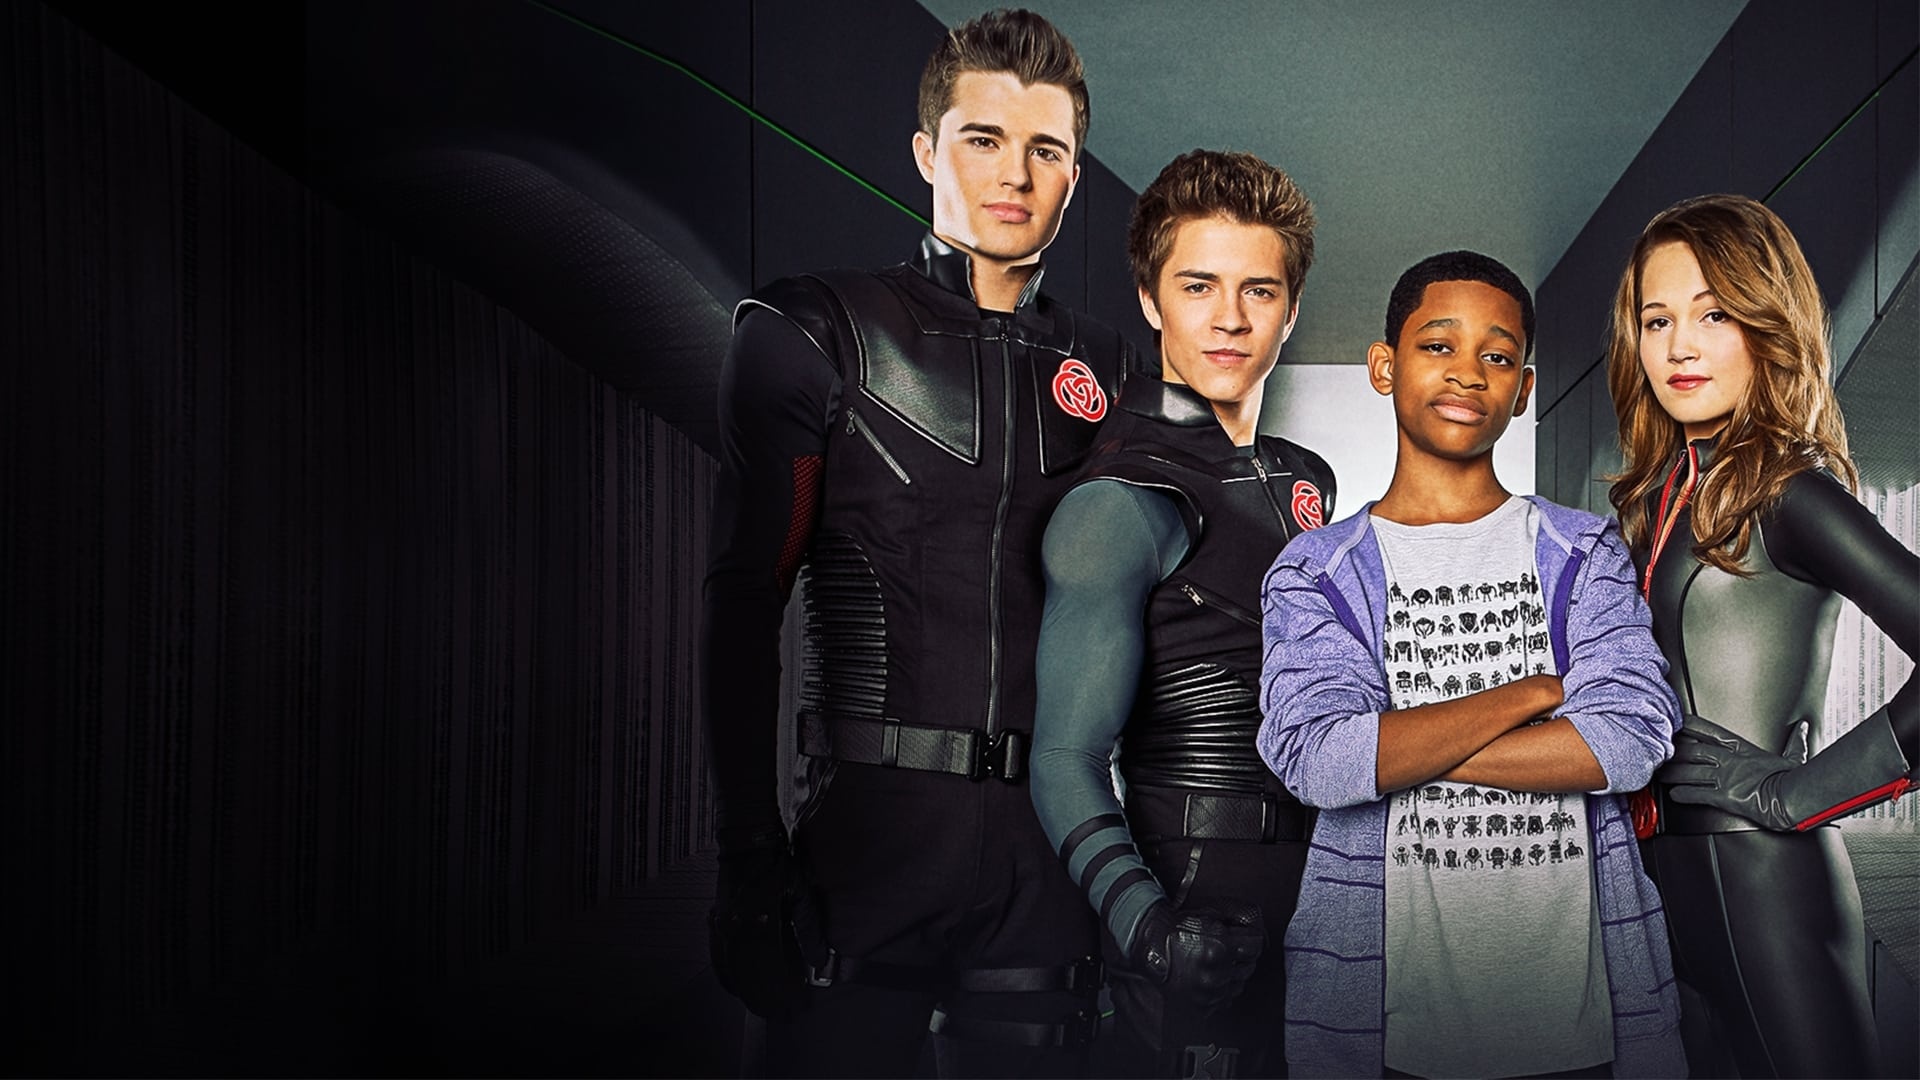 Lab Rats TV series, Superpower experiments, High-tech facility, Heroic endeavors, 1920x1080 Full HD Desktop